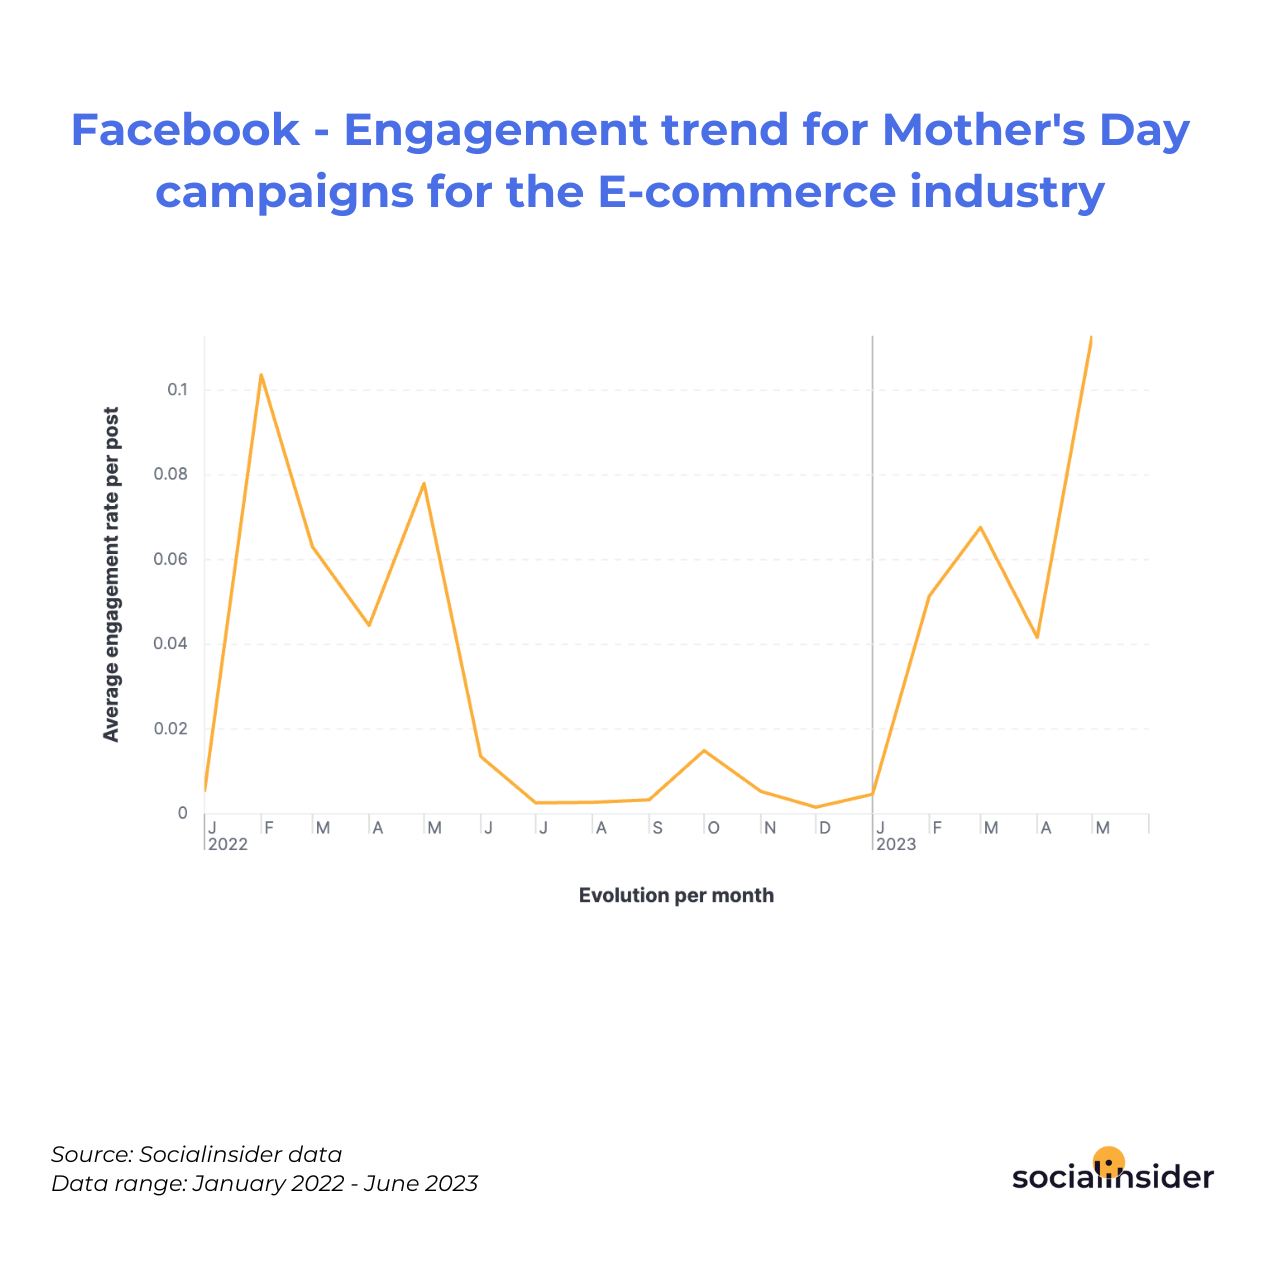 Facebook - Engagement trend for Mother's Day campaigns for the E-commerce industry